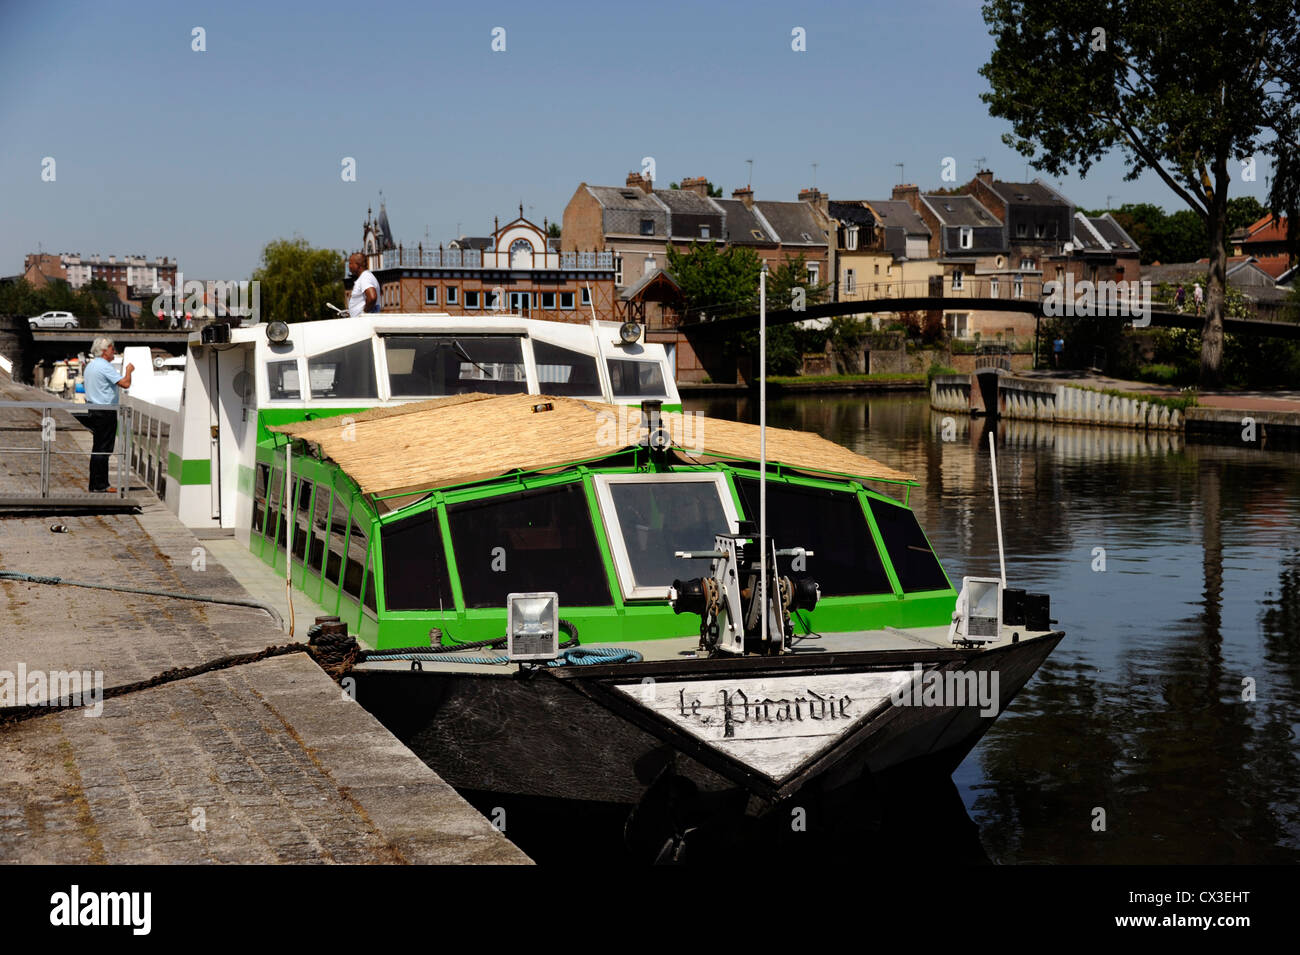 Boot-Restaurant Le Picardie, Somme River, Amiens, Somme, Picardie, Frankreich Stockfoto